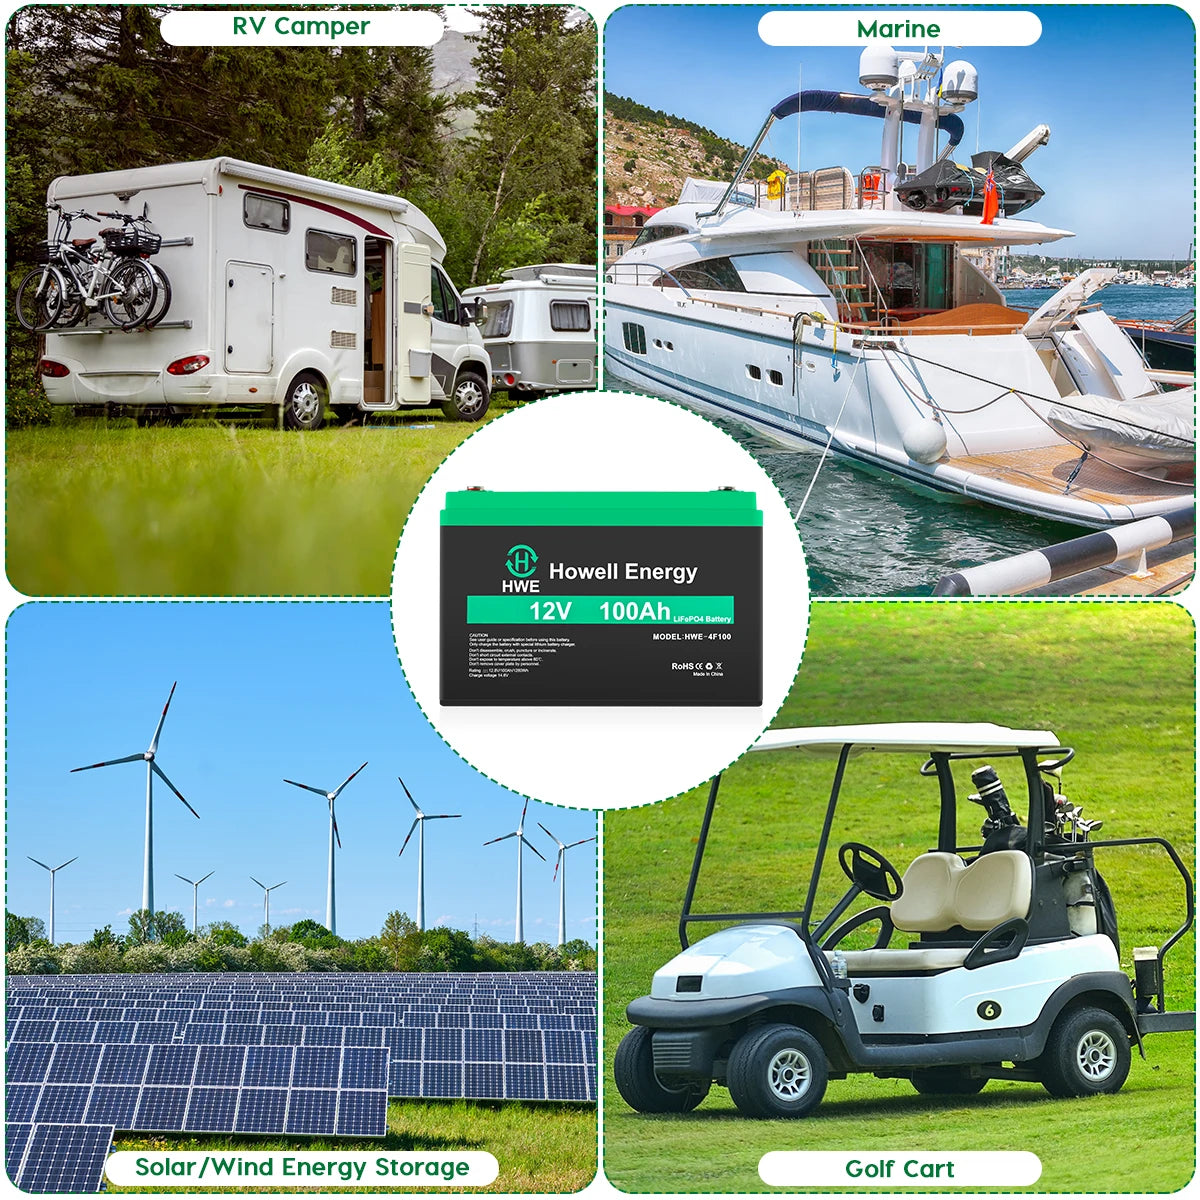 Howell 12v 100ah Battery, High-capacity LiFePO4 battery for RVs, campers, marines, and golf carts, ideal for solar and wind energy storage.